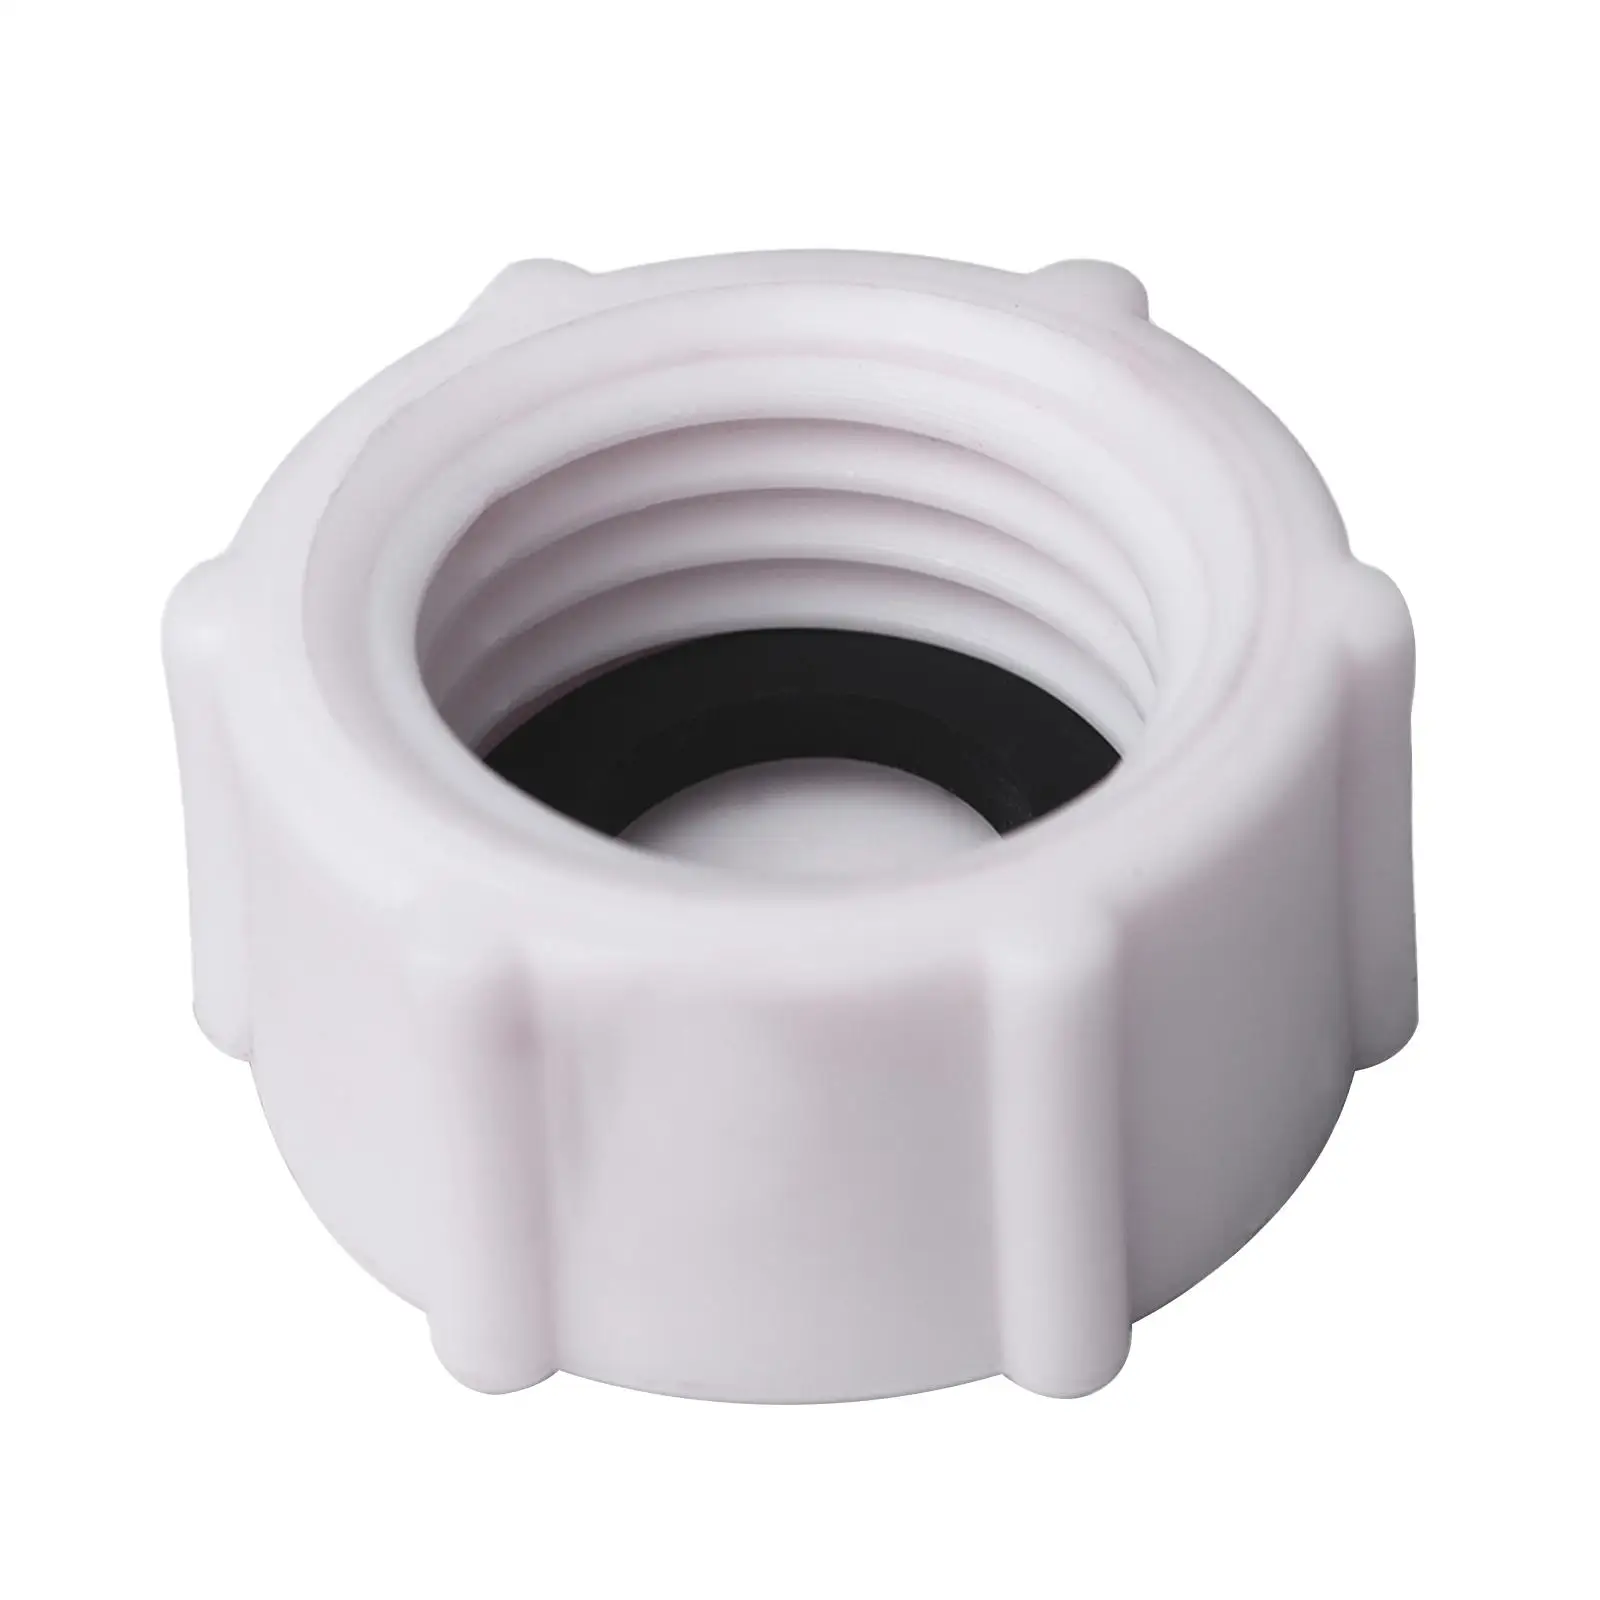 Pool Drain Valve Cap & O Rings for Sand Filter Pump for Above Ground Pool Replacement Parts , Drain Plug Cap